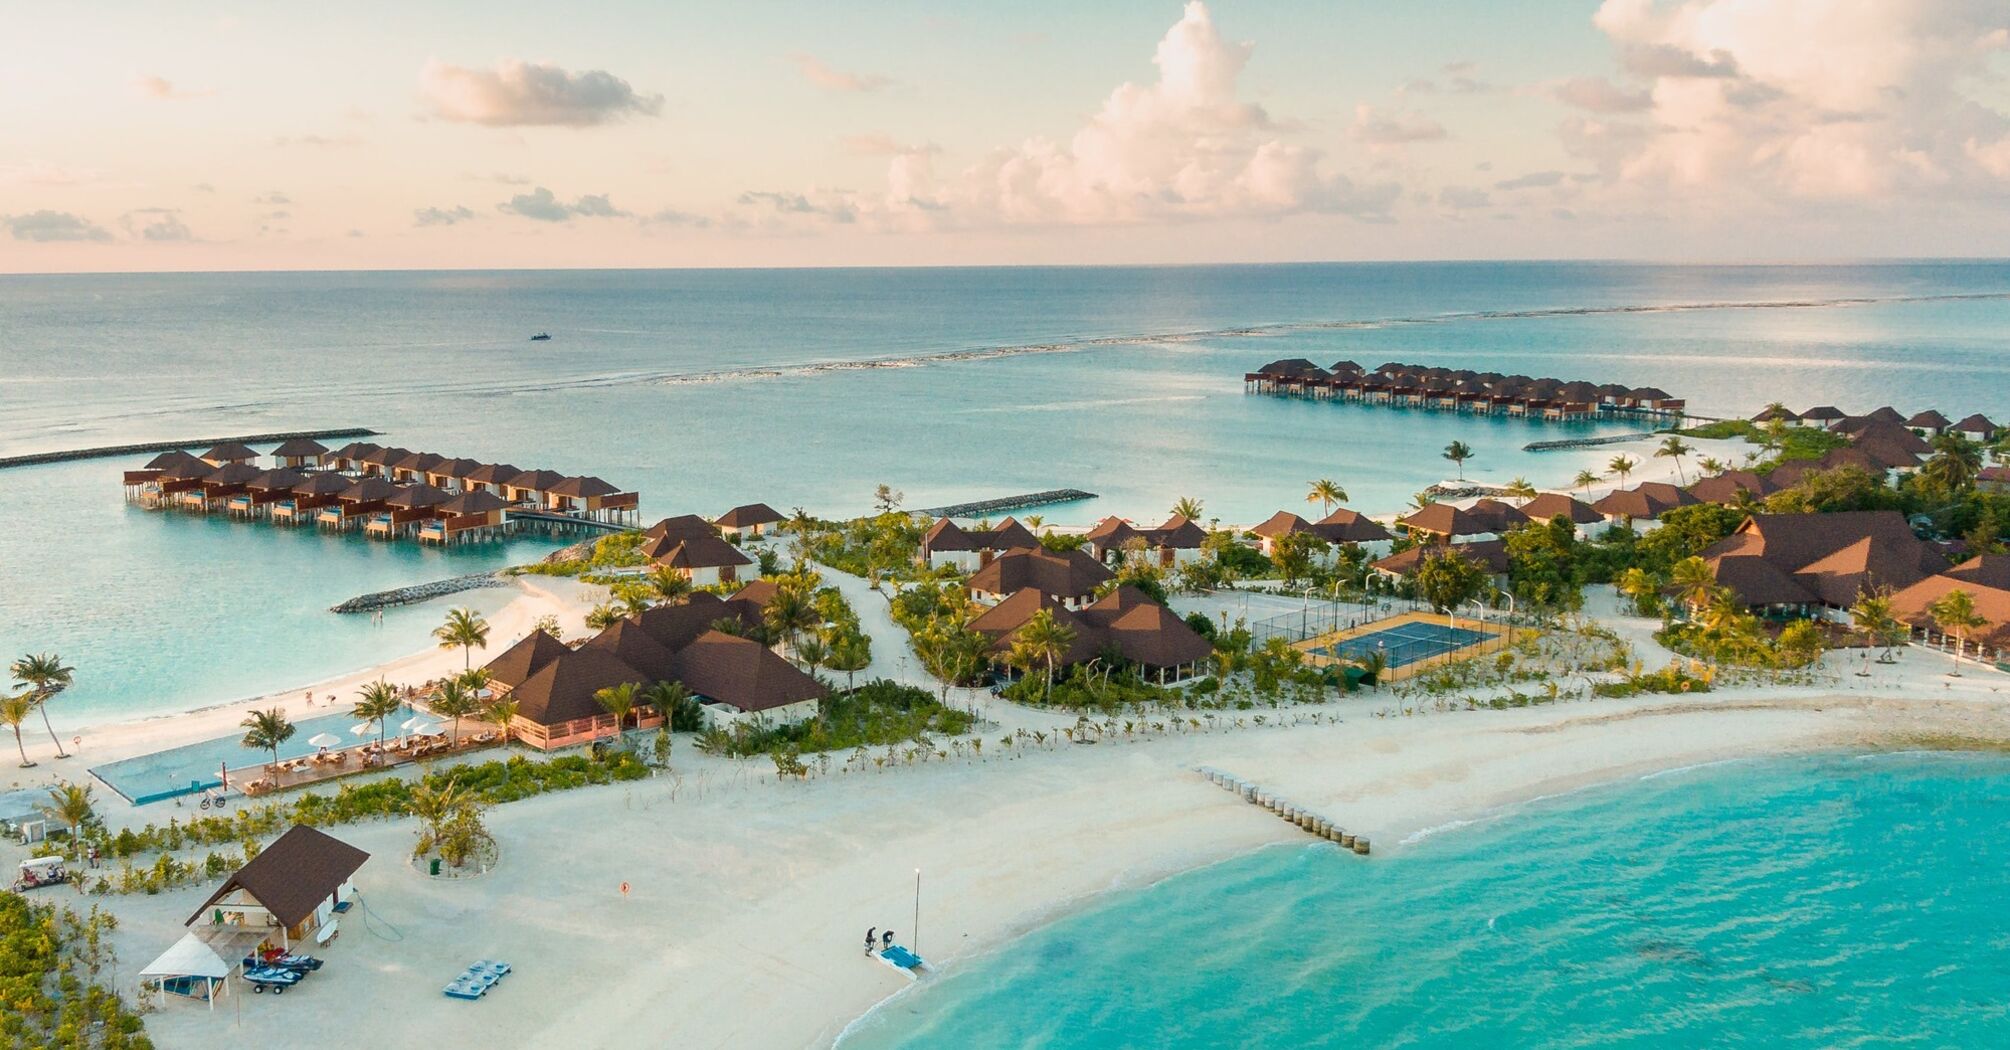 Incredible views and service: the best hotels in the Maldives for a full-fledged vacation